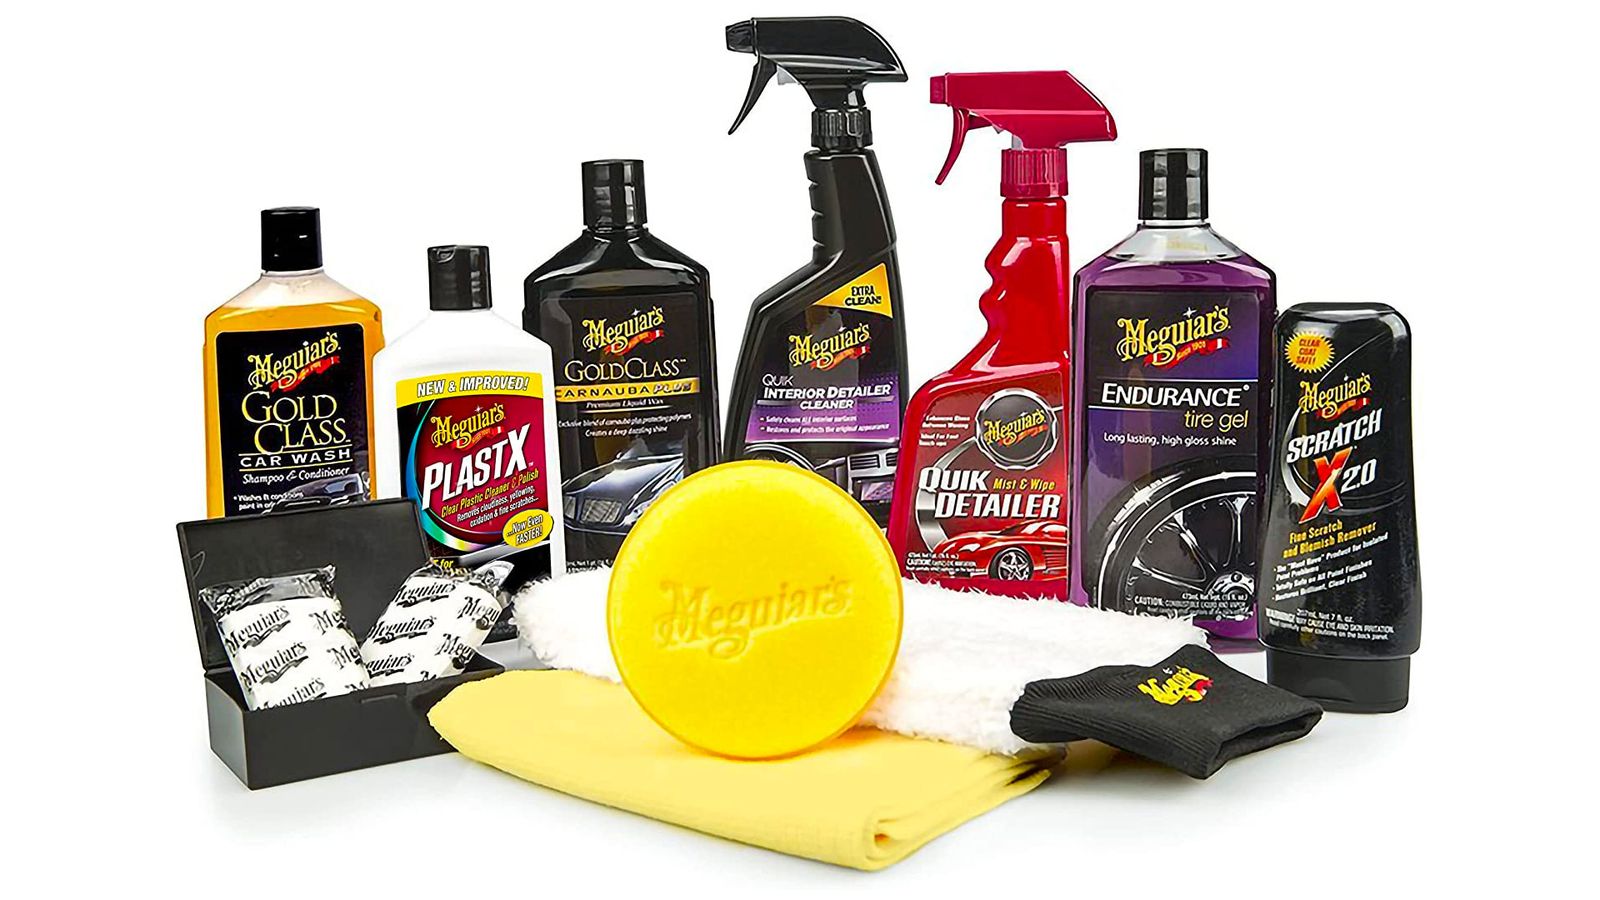 Meguiar's Complete Car Care Kit product image of a selection of bottles, clothes, and other car cleaning products.